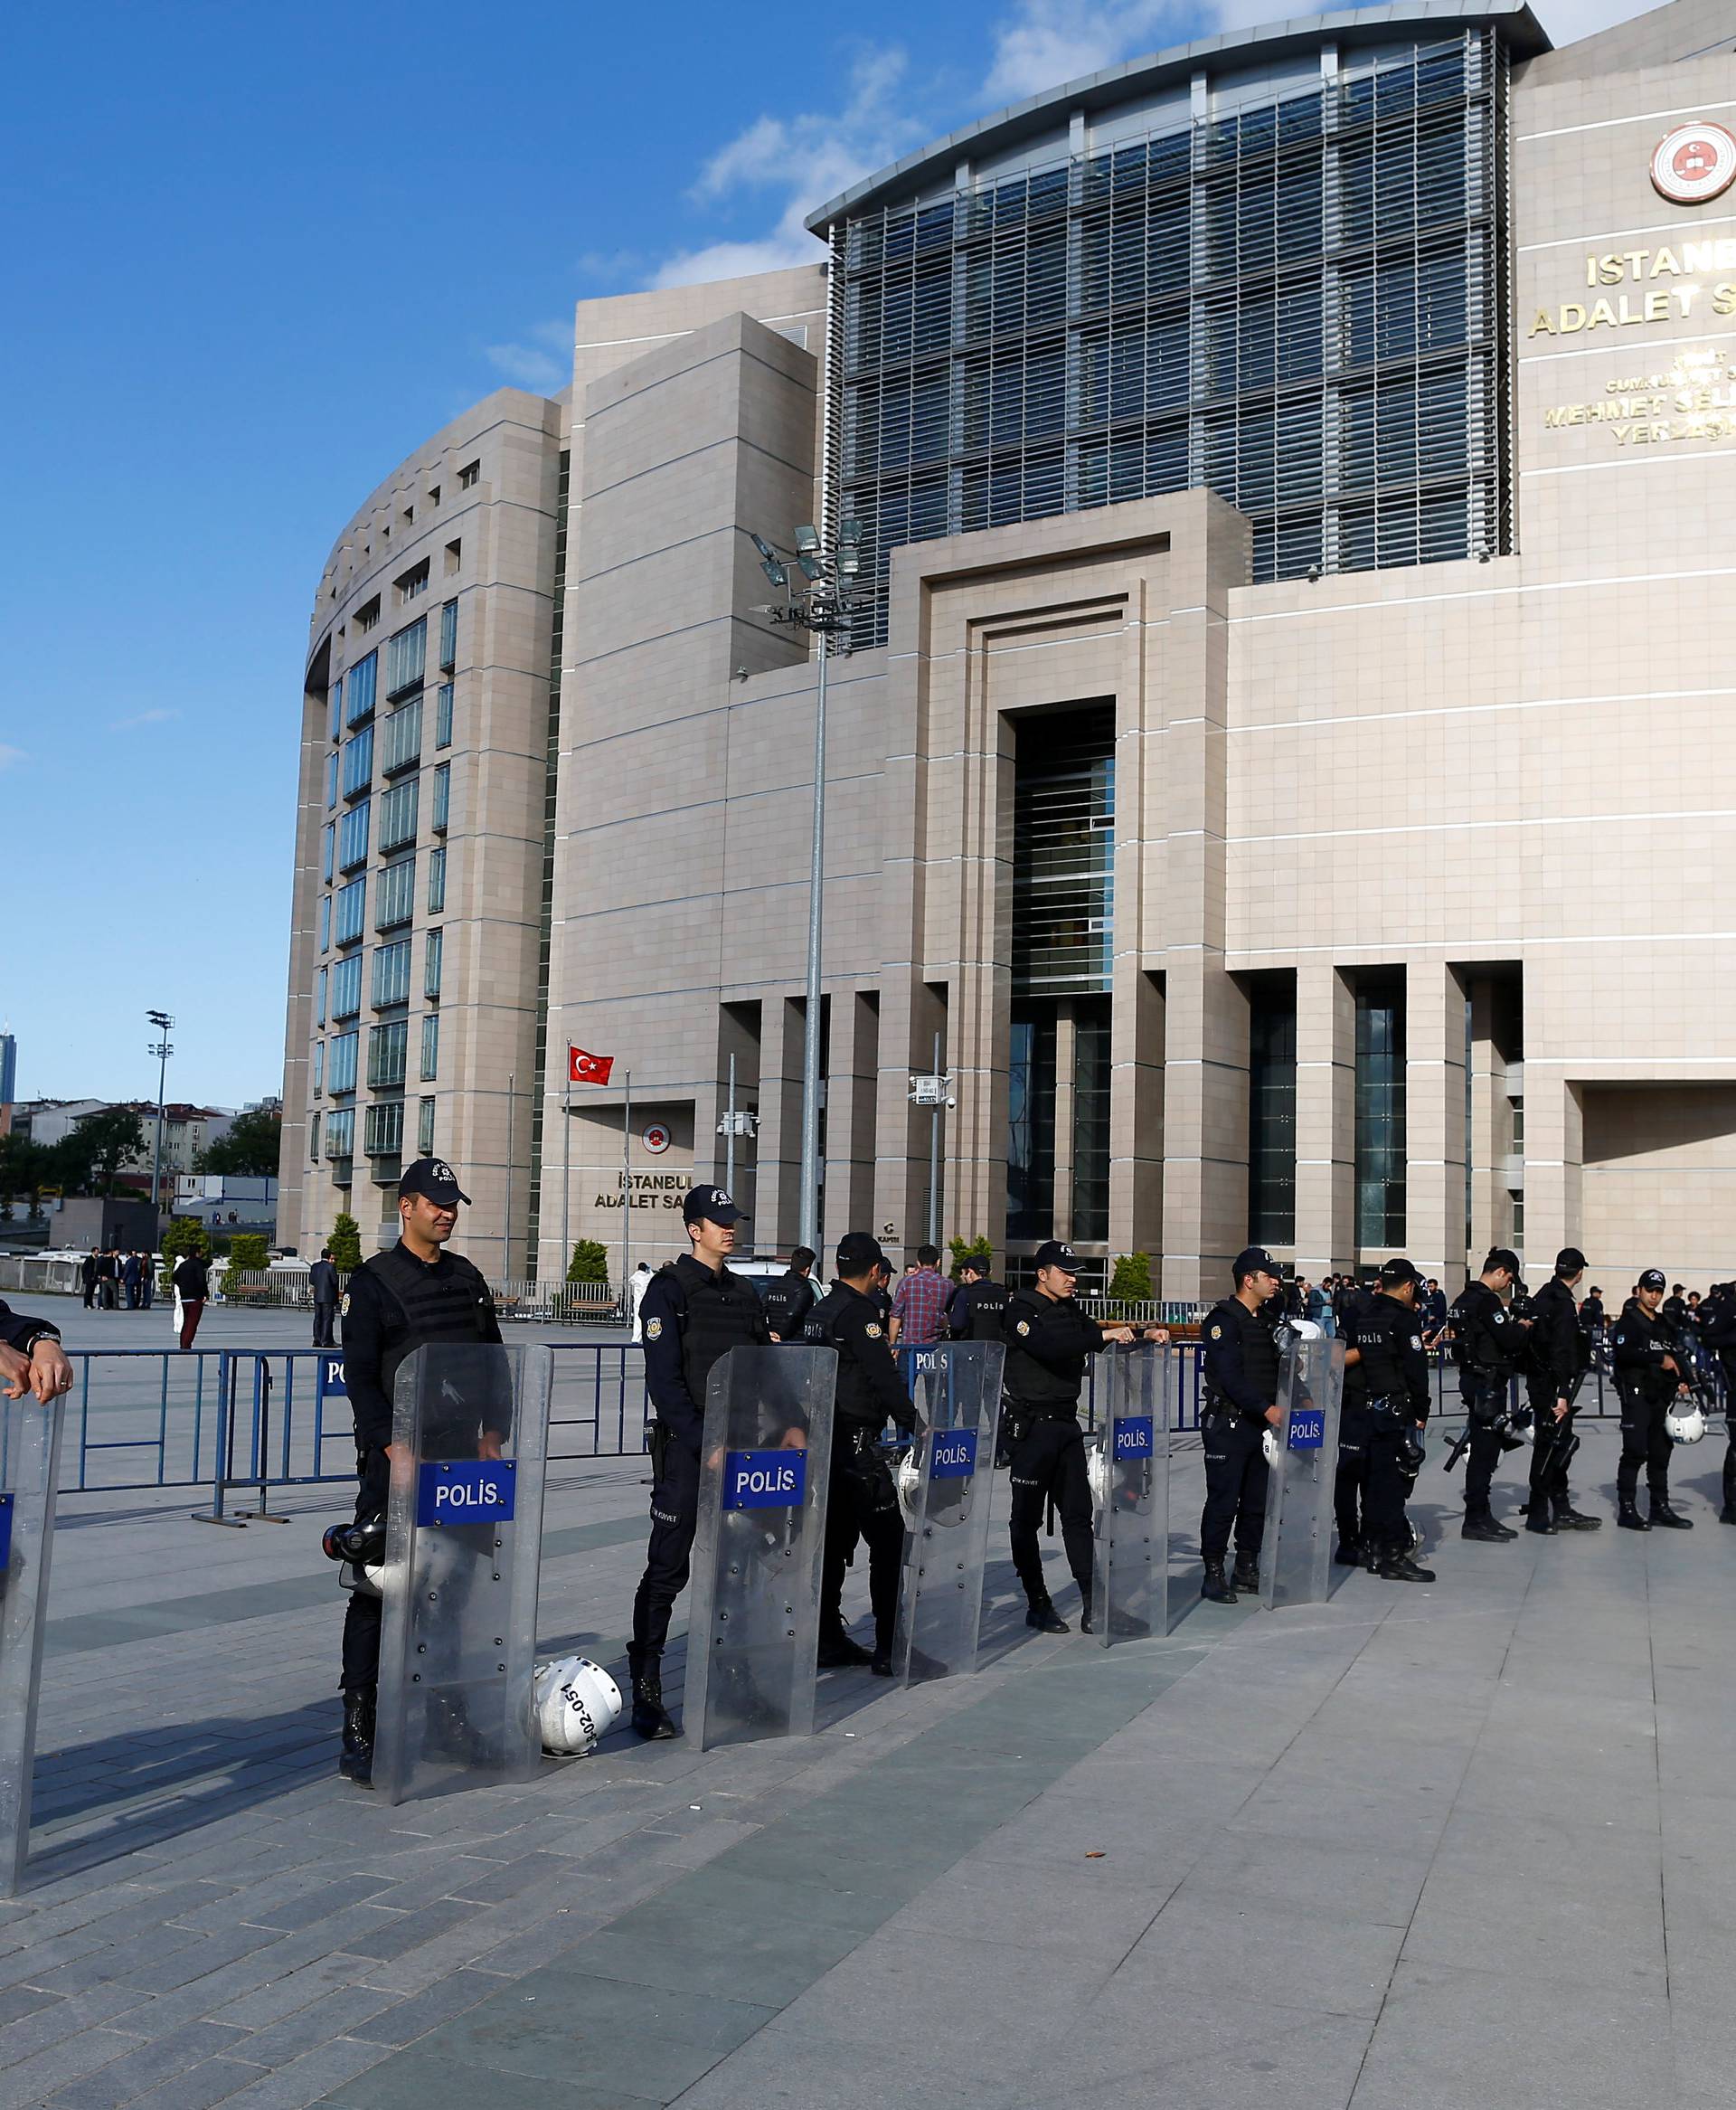 Turkish riot policemen secure the area after an attack aganist Can Dundar, editor-in-chief of Cumhuriyet in front of the Justice Palace in Istanbul